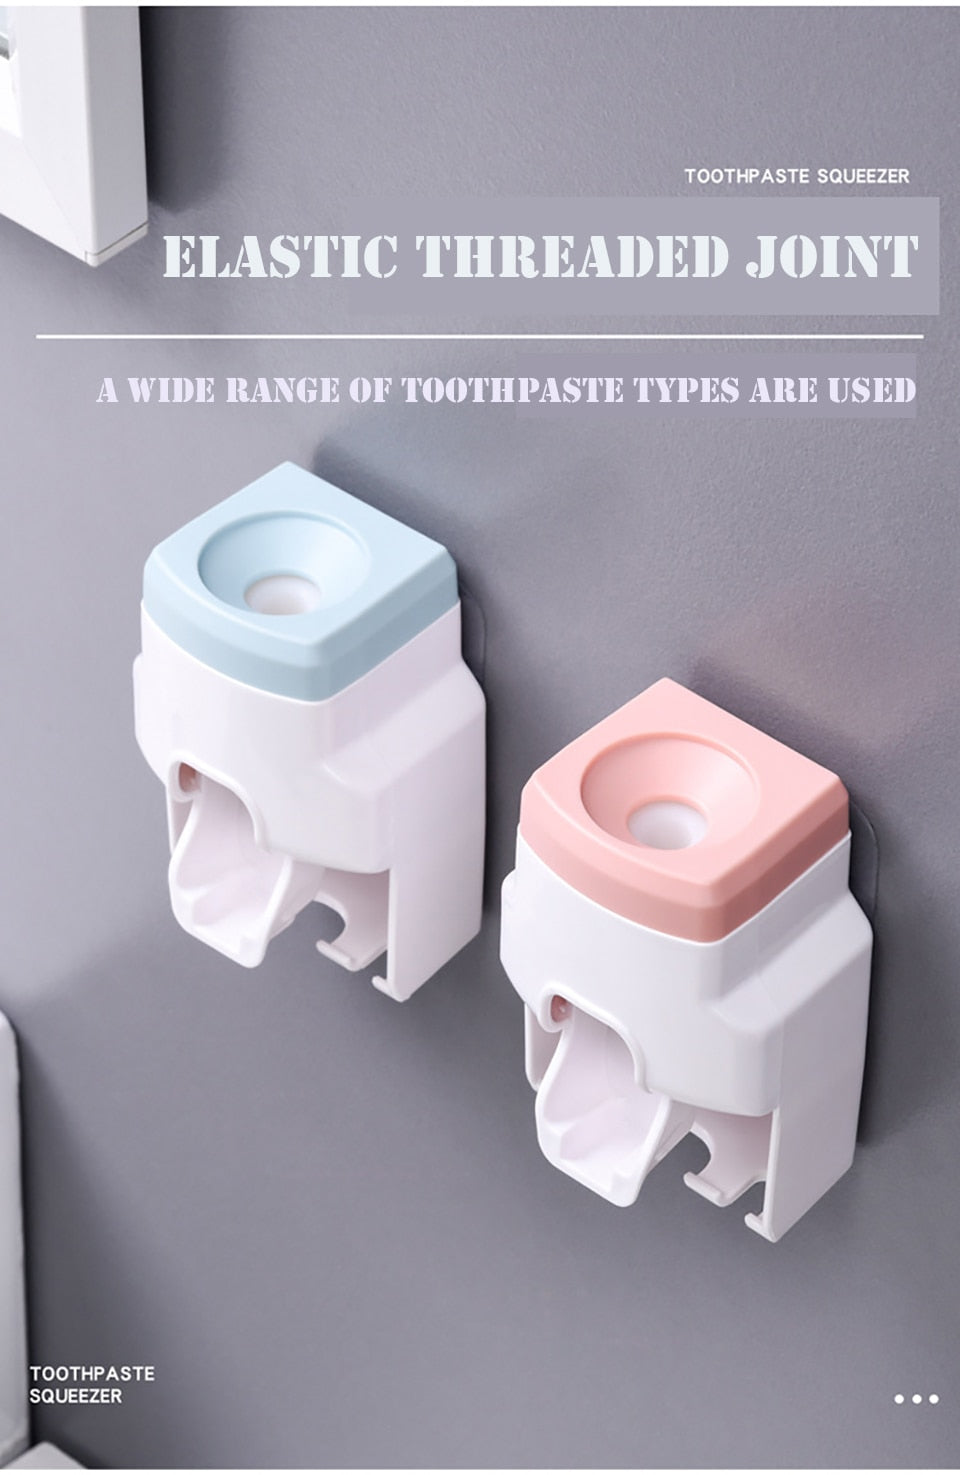 Toothbrush holder with automatic toothpaste dispenser